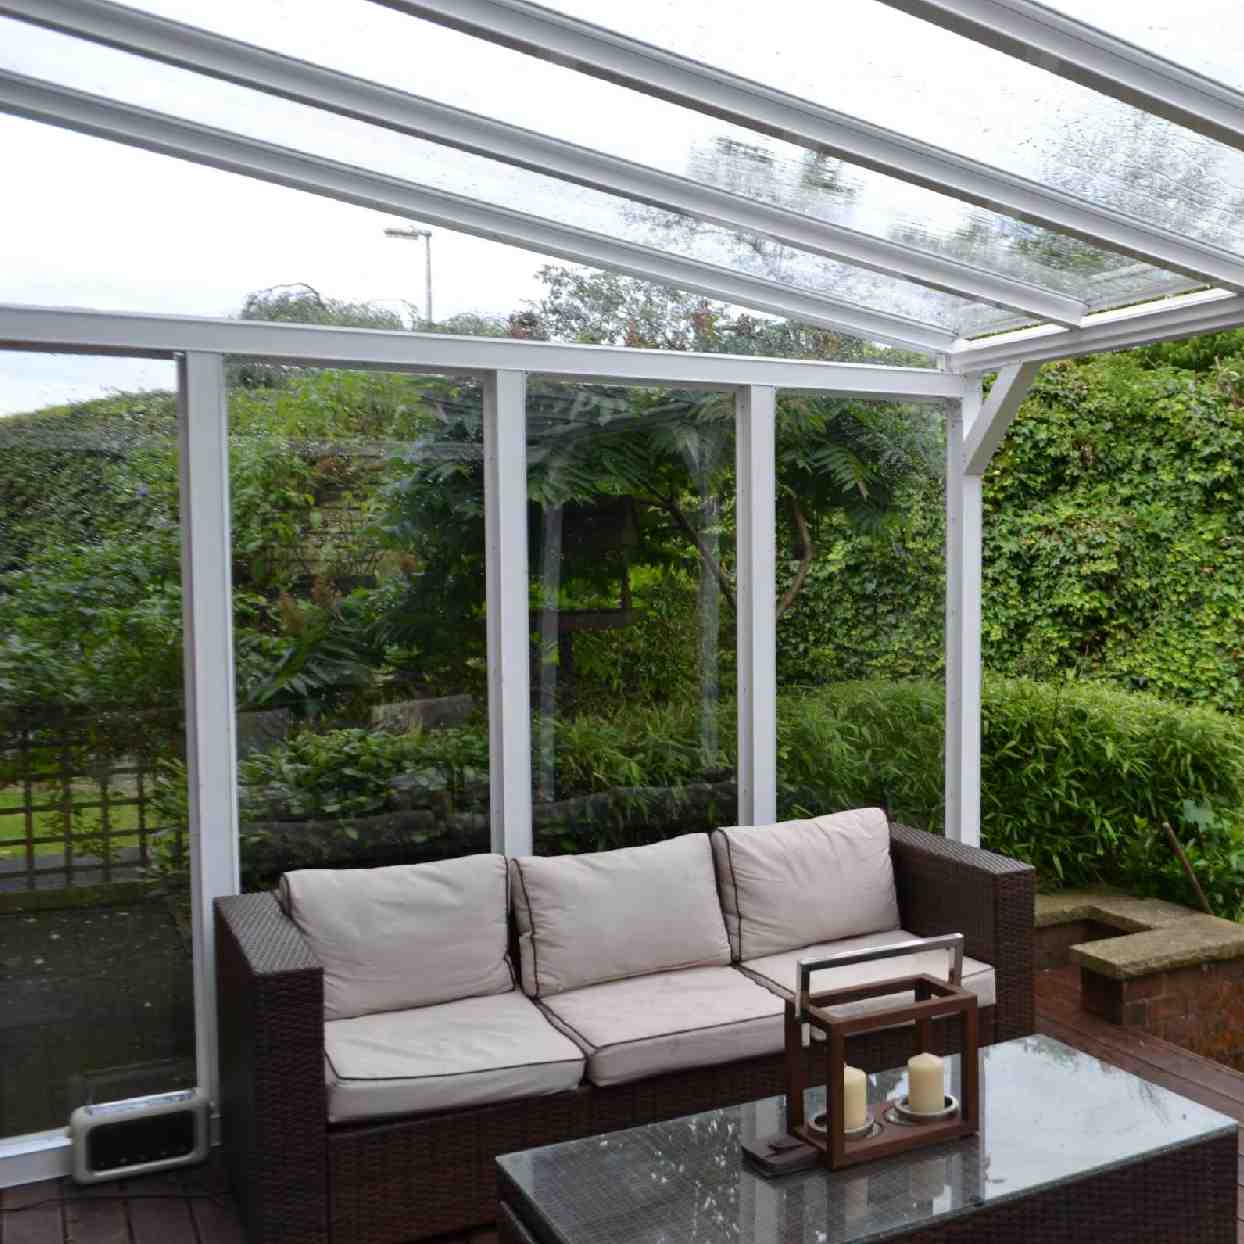 Buy Omega Verandah White with 16mm Polycarbonate Glazing - 12.0m (W) x 1.5m (P), (5) Supporting Posts online today